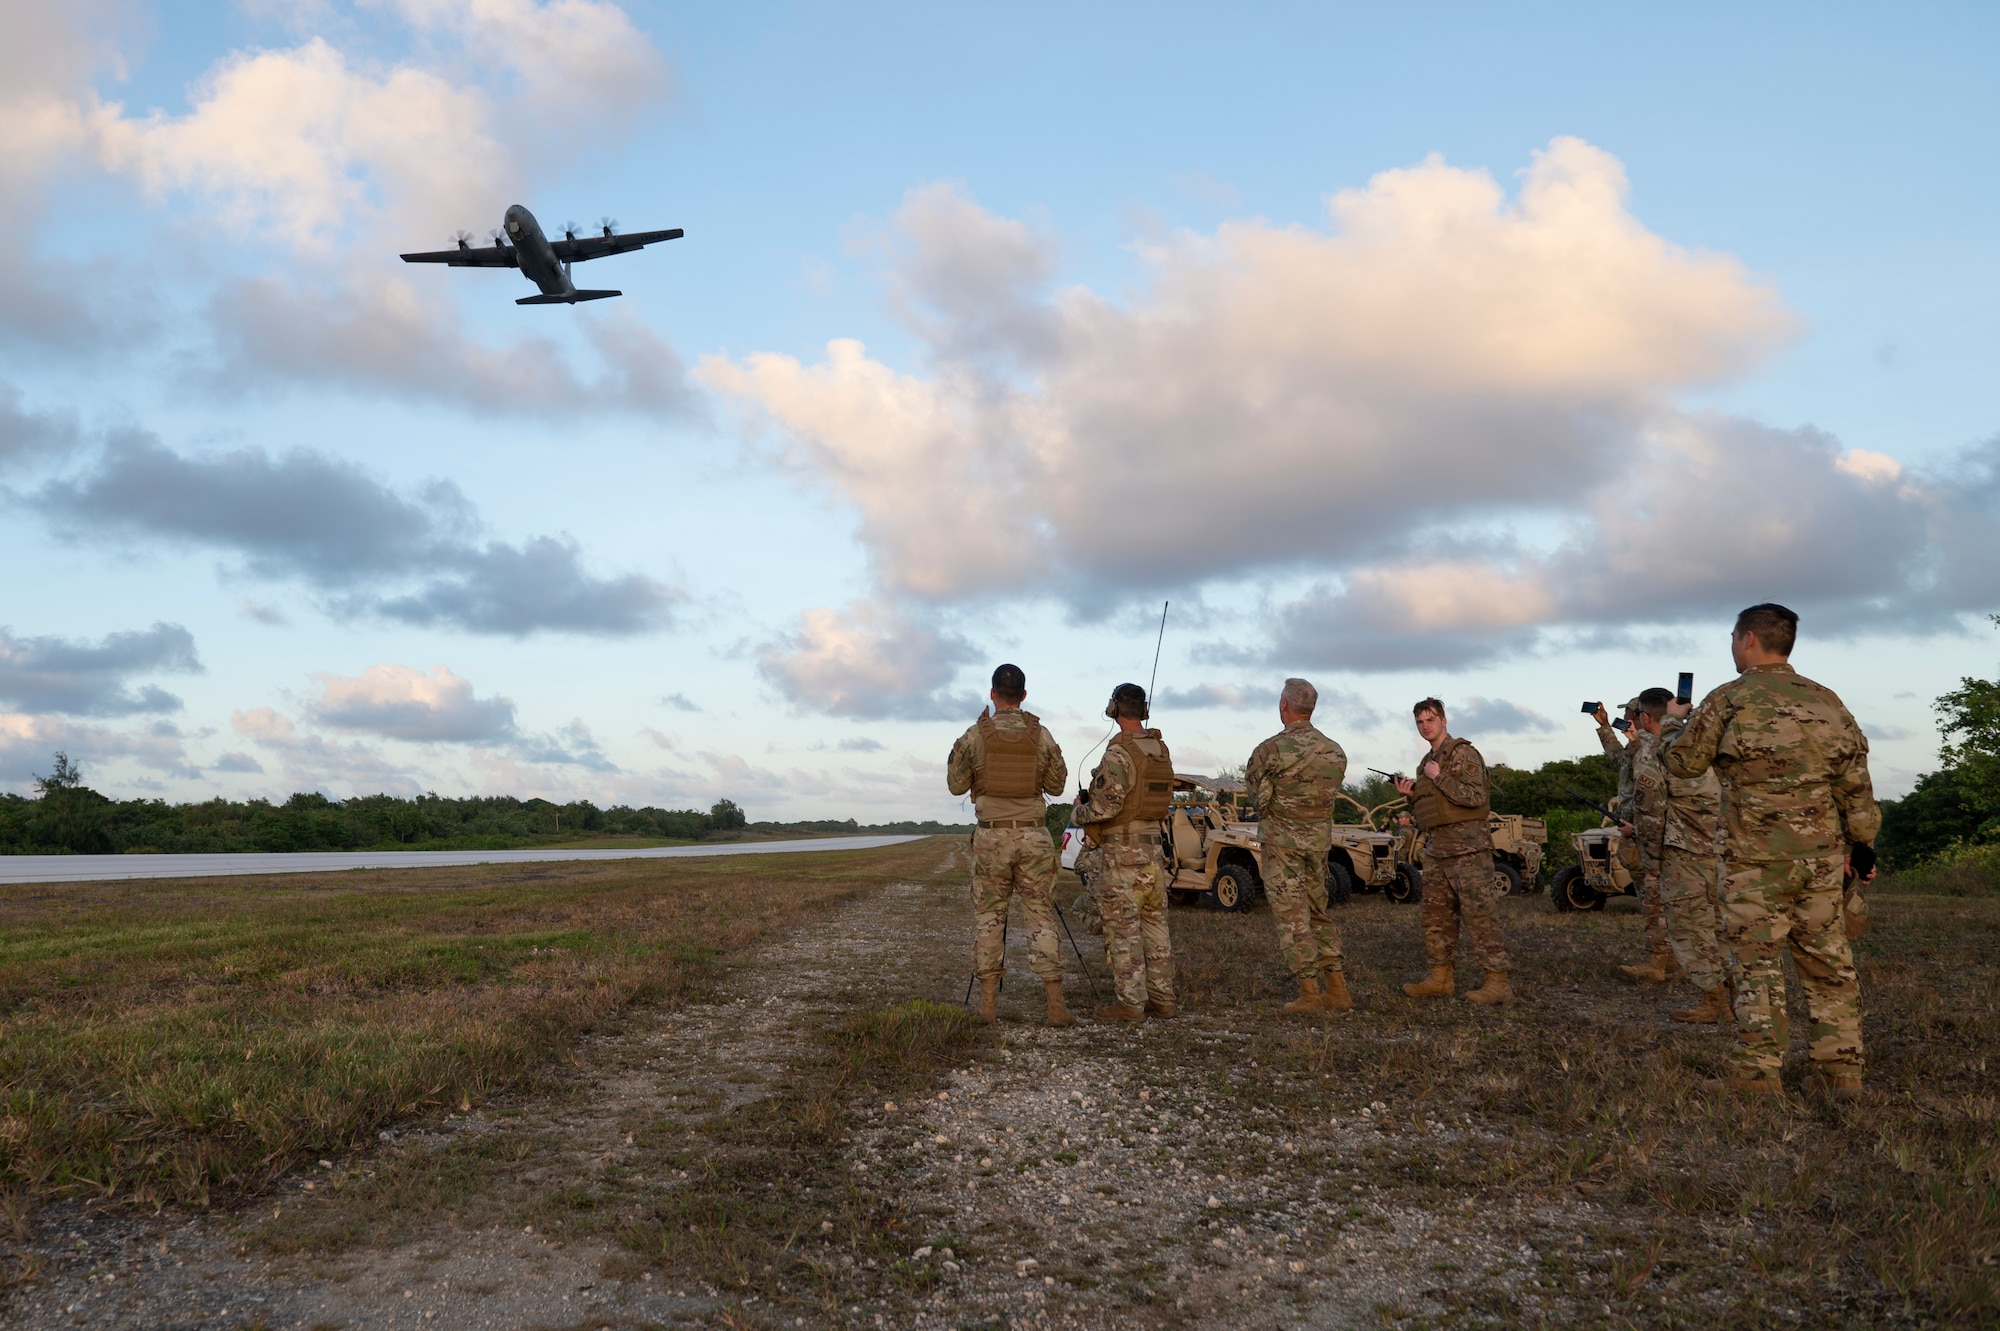 A U.S. Air Force C-130J Super Hercules takes off from Pacific Regional Training Center, Andersen Air Force Base, Guam, Jan. 19, 2023. The 36th Contingency Response Squadron conducted a training exercise to set up a drop zone while the C-130J Super Hercules crew aimed to put the drops on target. (U.S. Air Force photo by Airman 1st Class Spencer Perkins)